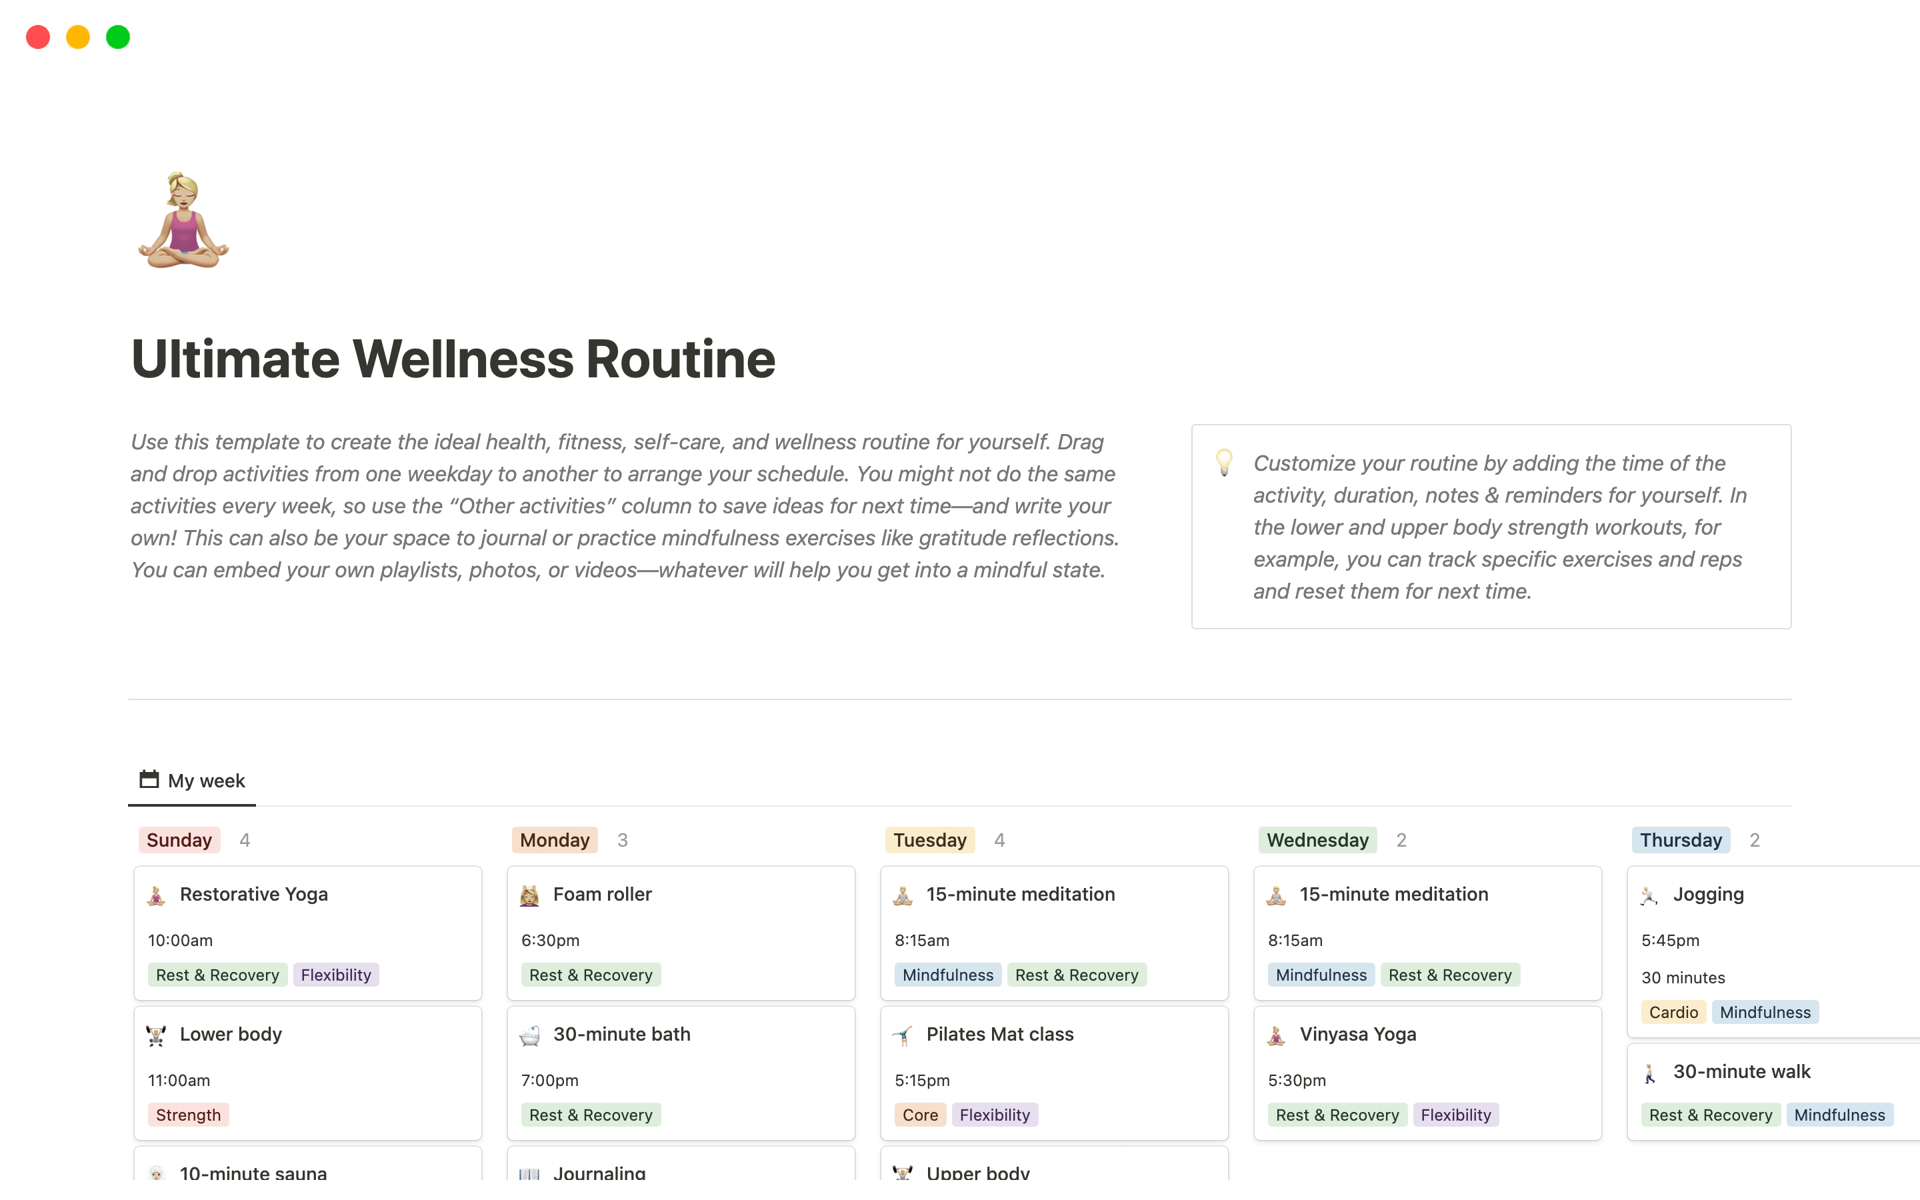 A visual routine and calendar for organizing your wellness routine, across your fitness, mindfulness, and self-care. 